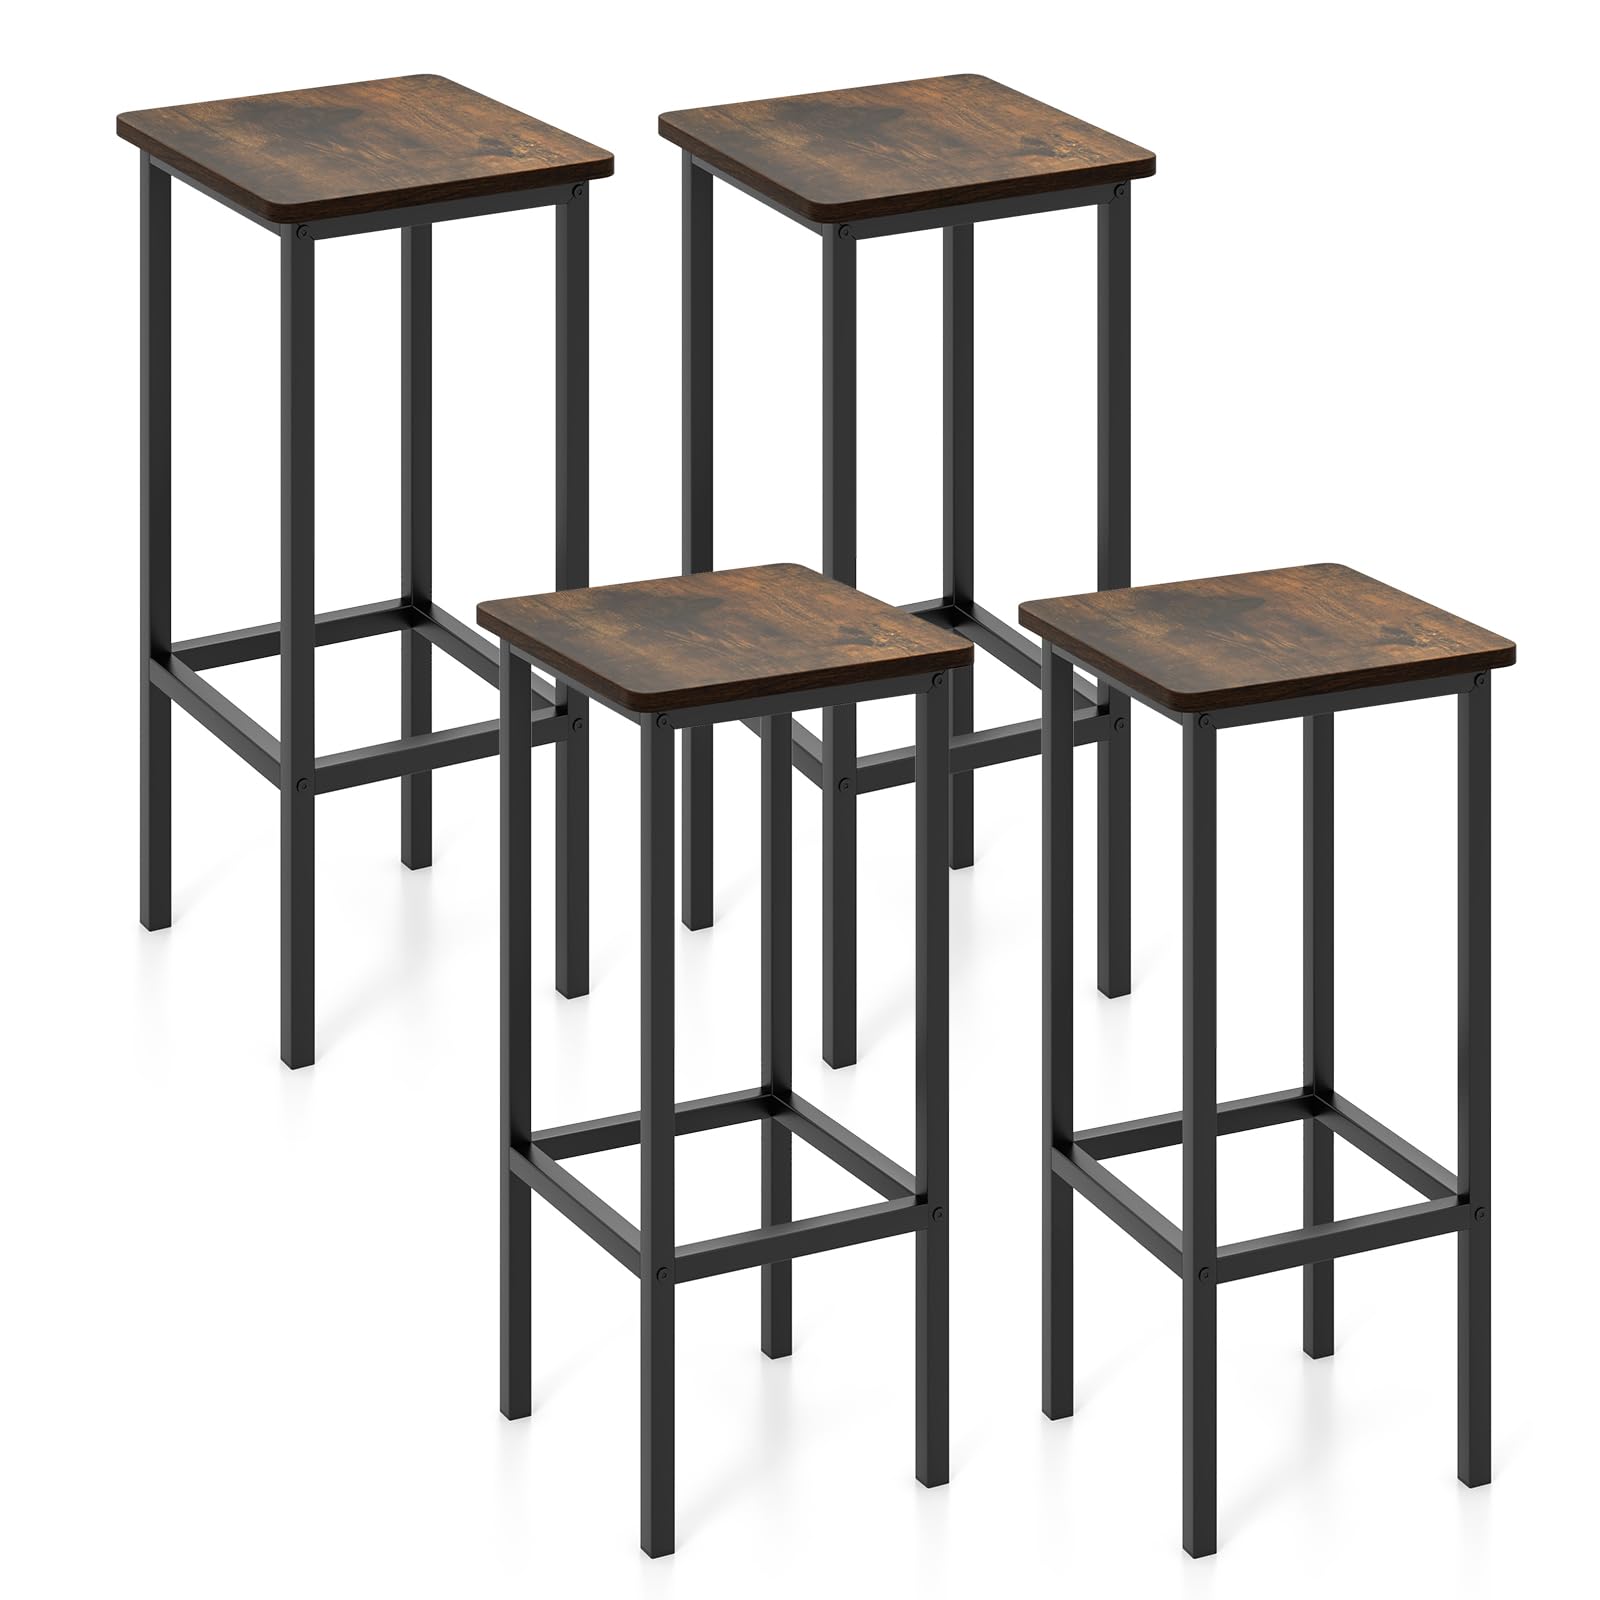 Giantex Bar Stools Set of 4, 26" Backless Barstools with Metal Legs & Footrest, Breakfast Bar Dining Chairs